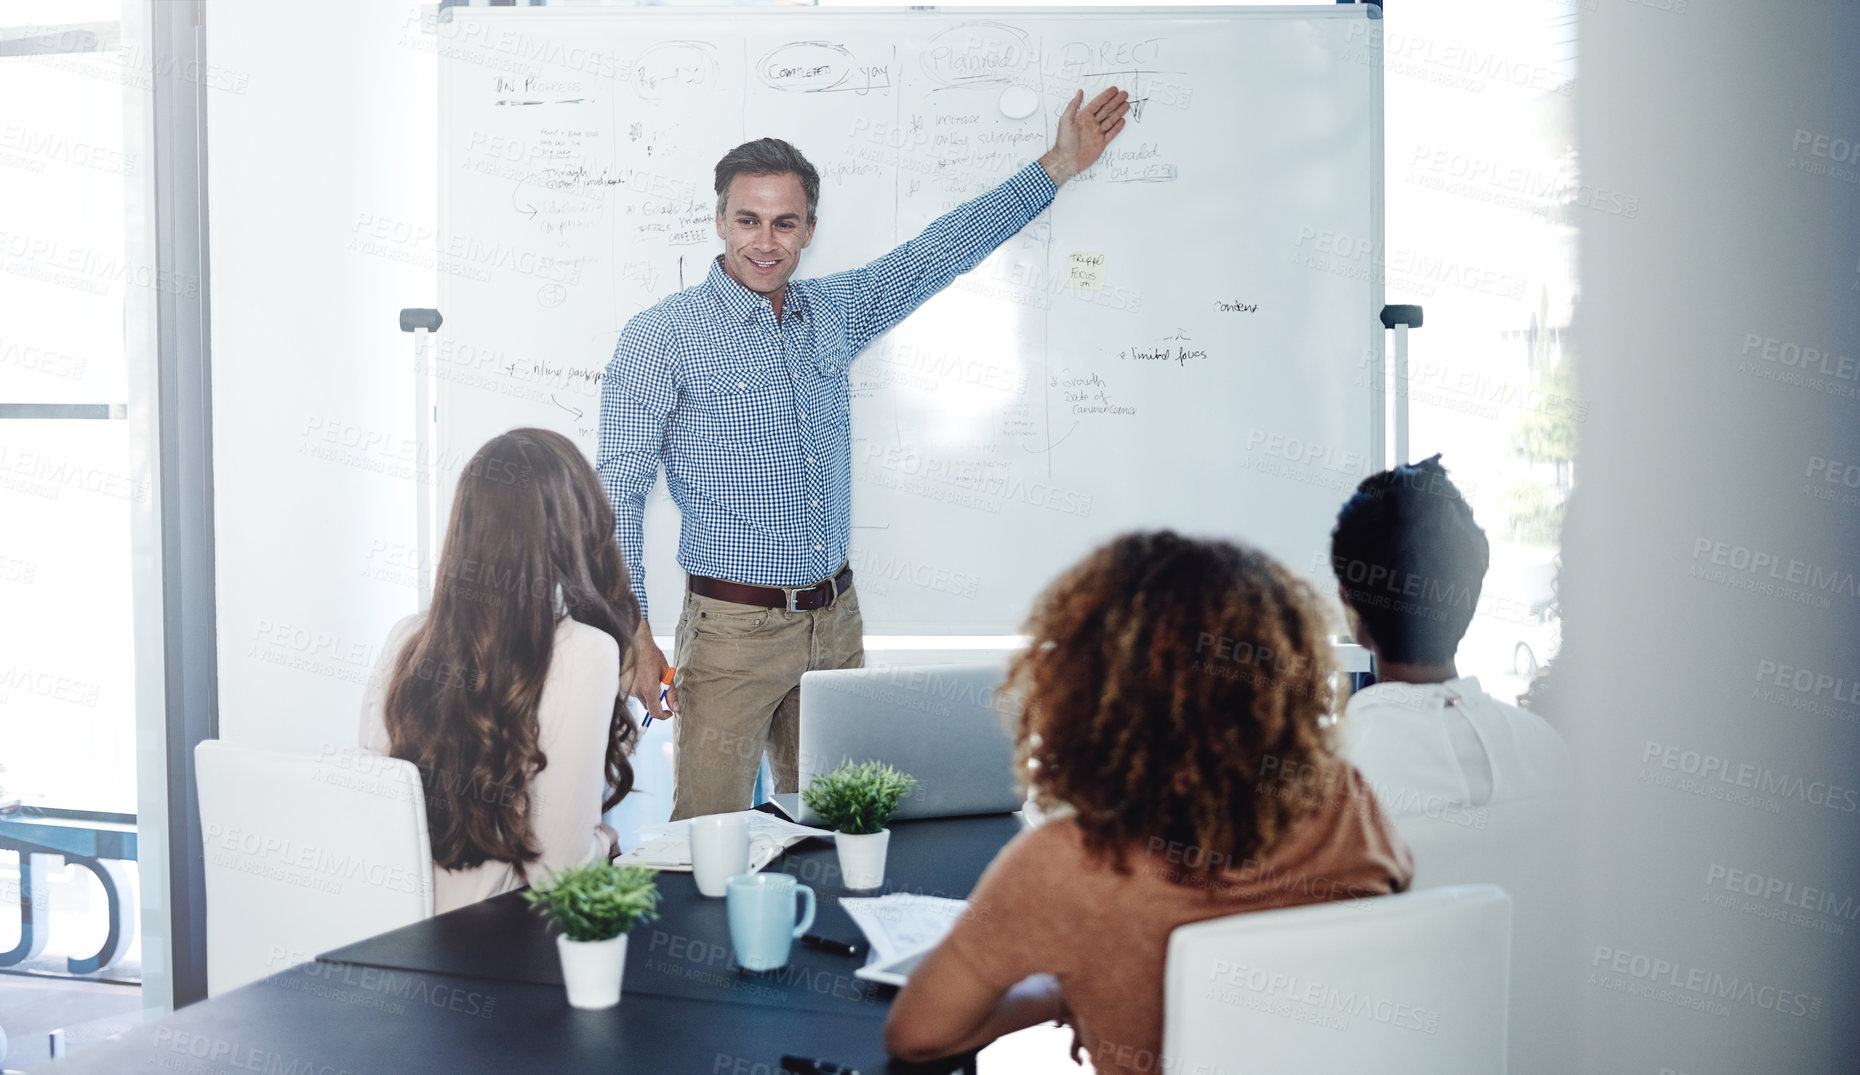 Buy stock photo Shot of a businessman delivering a presentation to his colleagues in a boardroom meeting